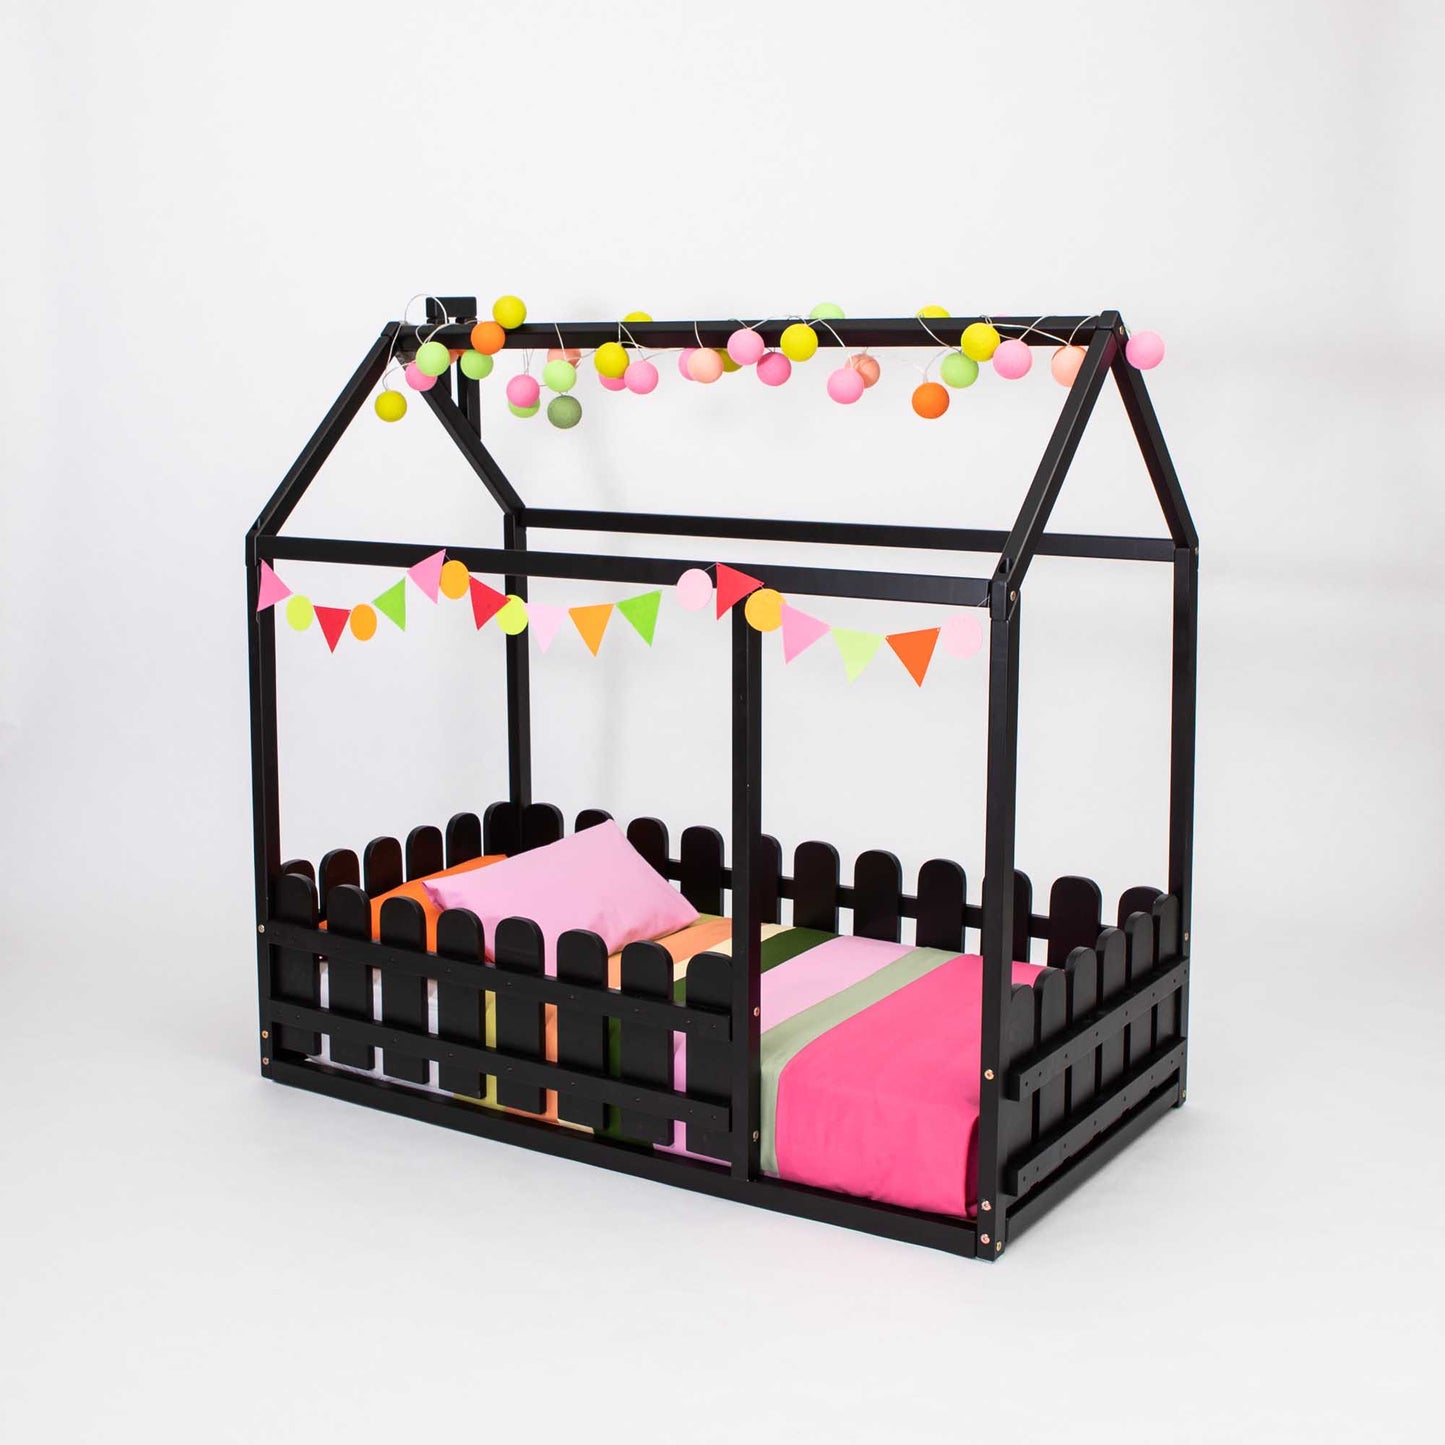 A black platform house bed with a picket fence and pink and black decorations.